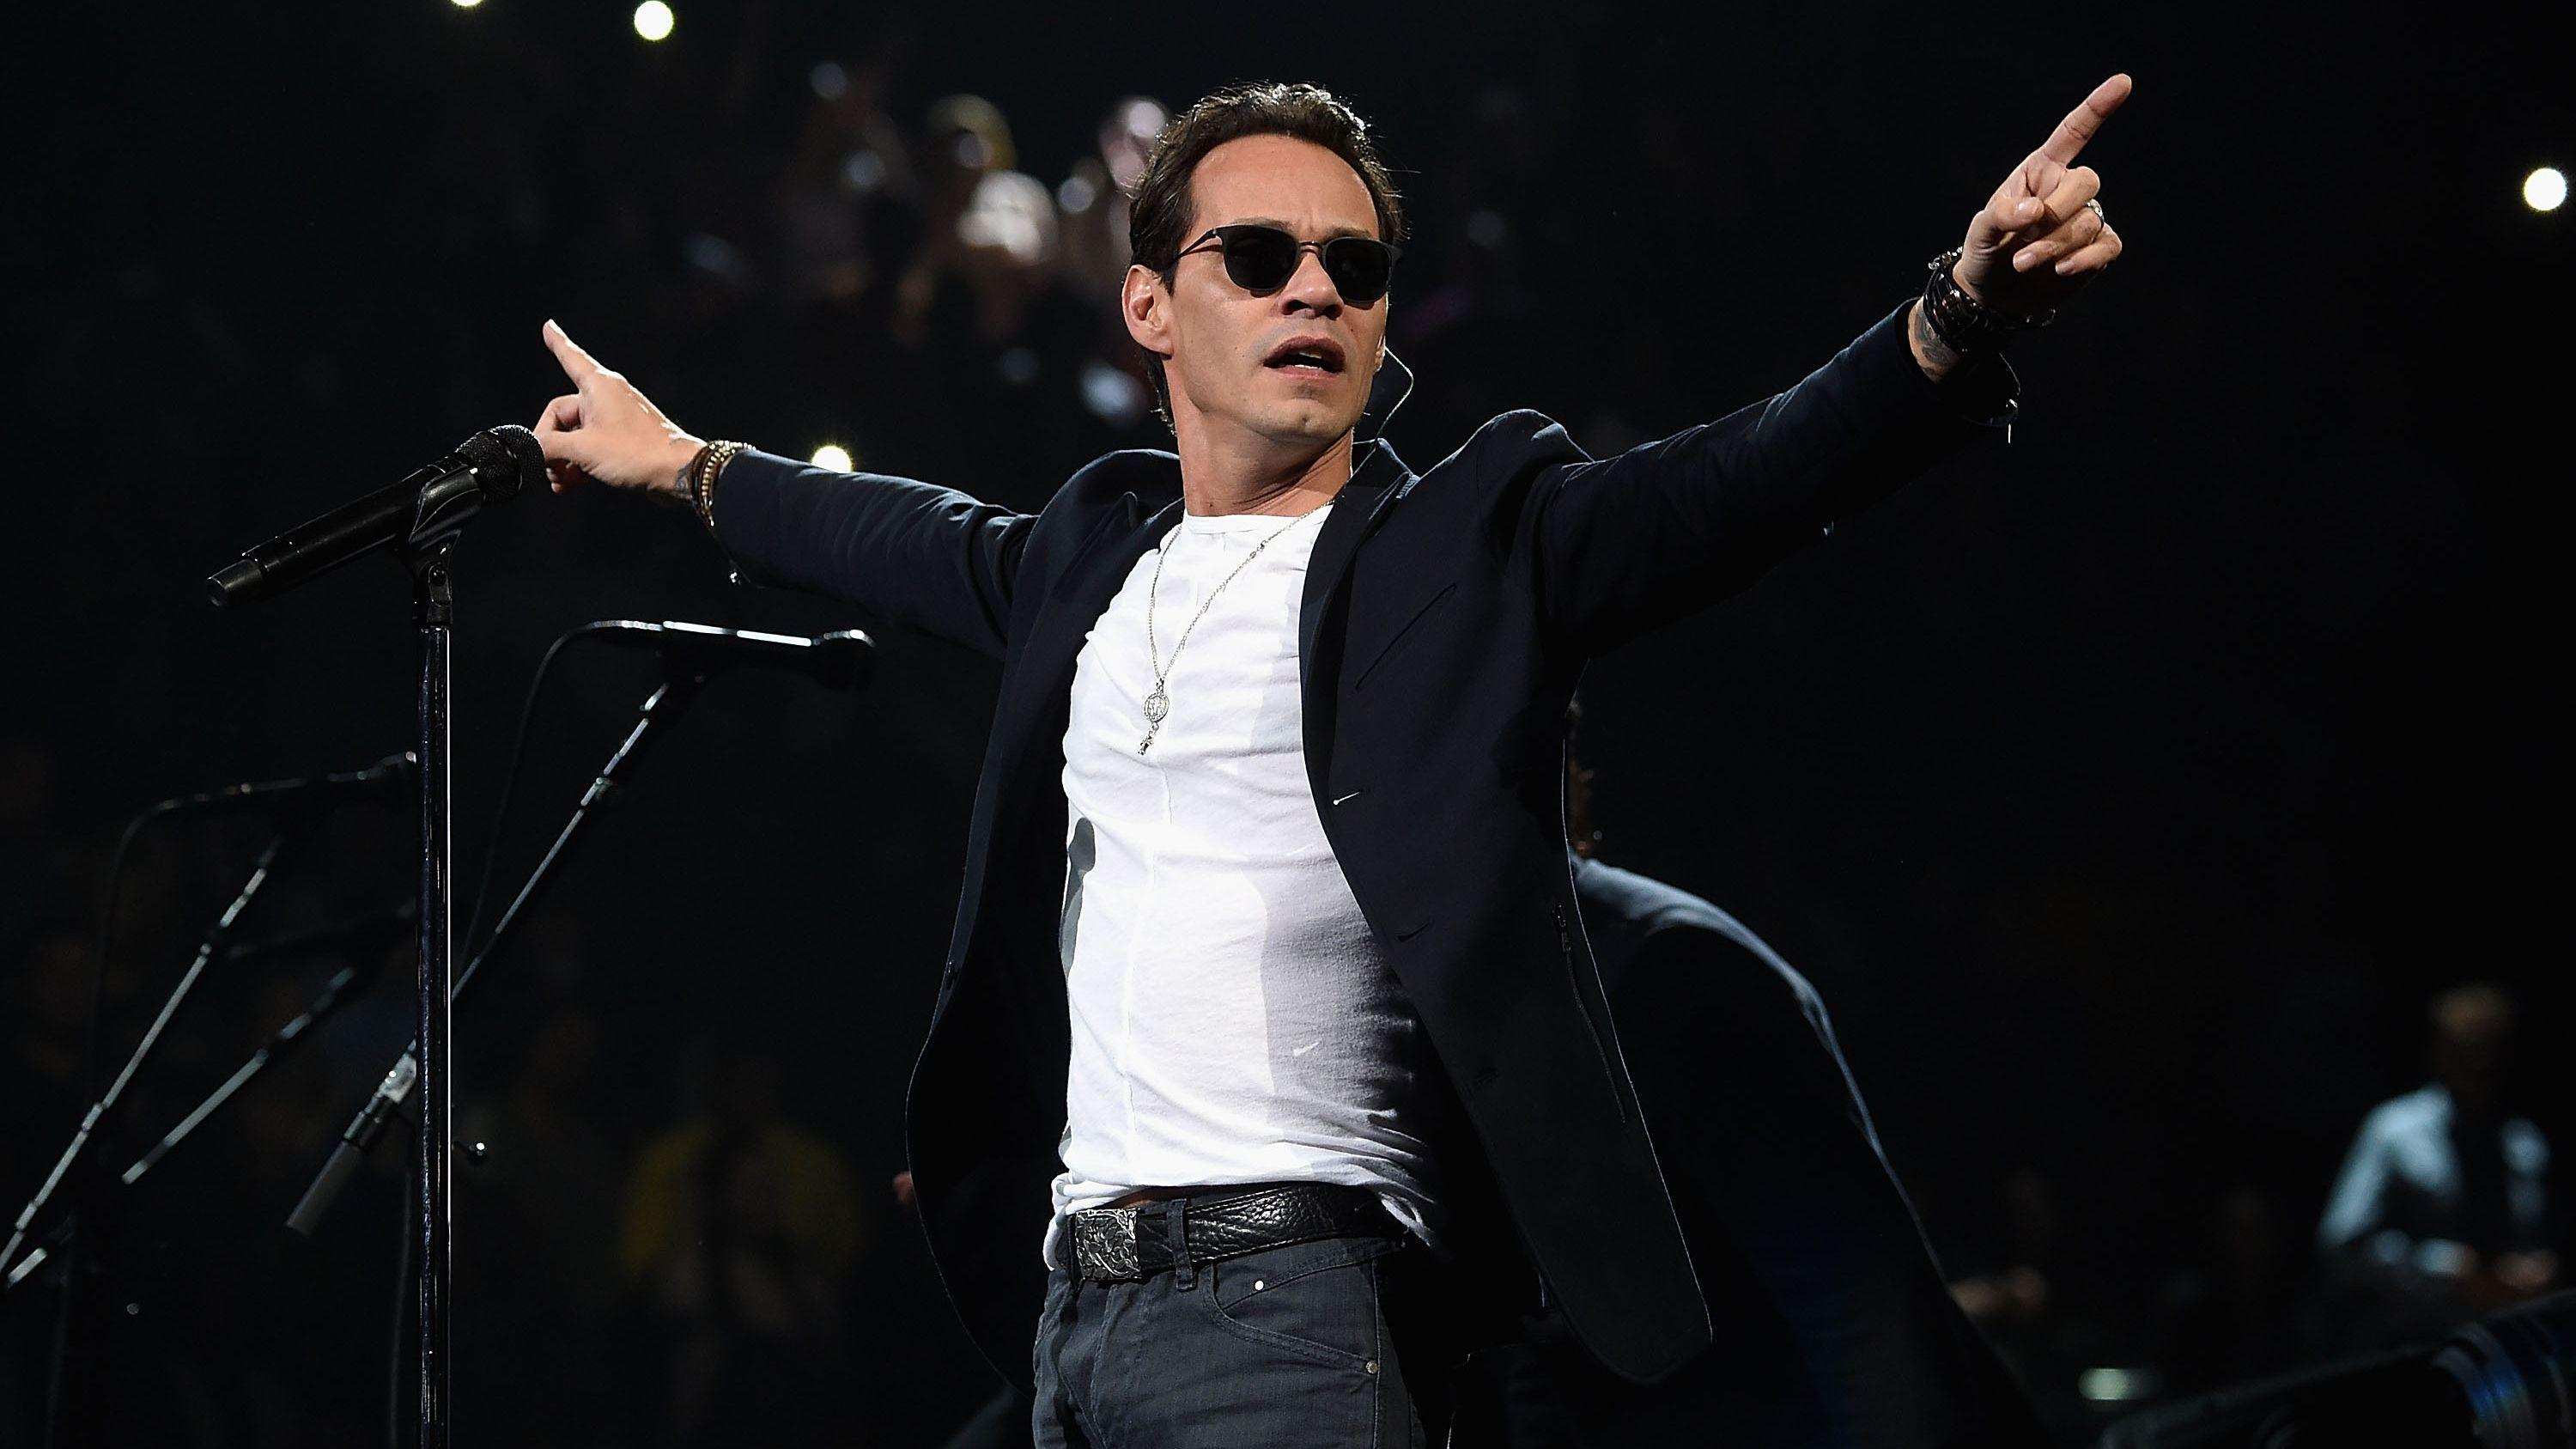 Marc Anthony Wallpaper Image Photo Picture Background